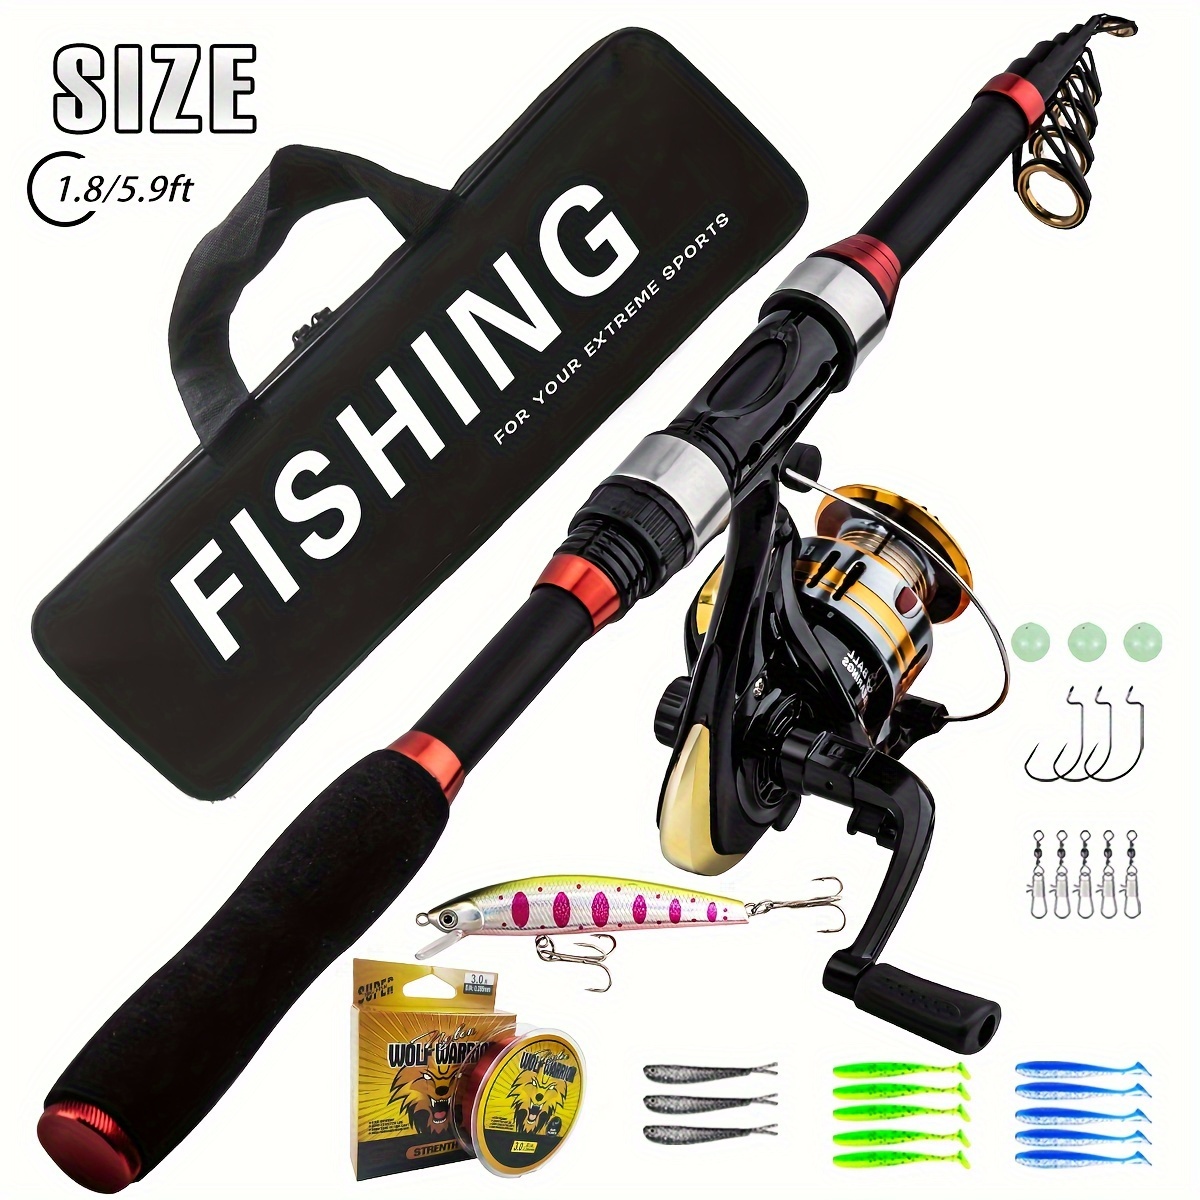 

1.8m Telescopic Fishing Rod & Reel Combo Kit With Accessories - Medium-fast Action, Spinning Gear Set For Anglers